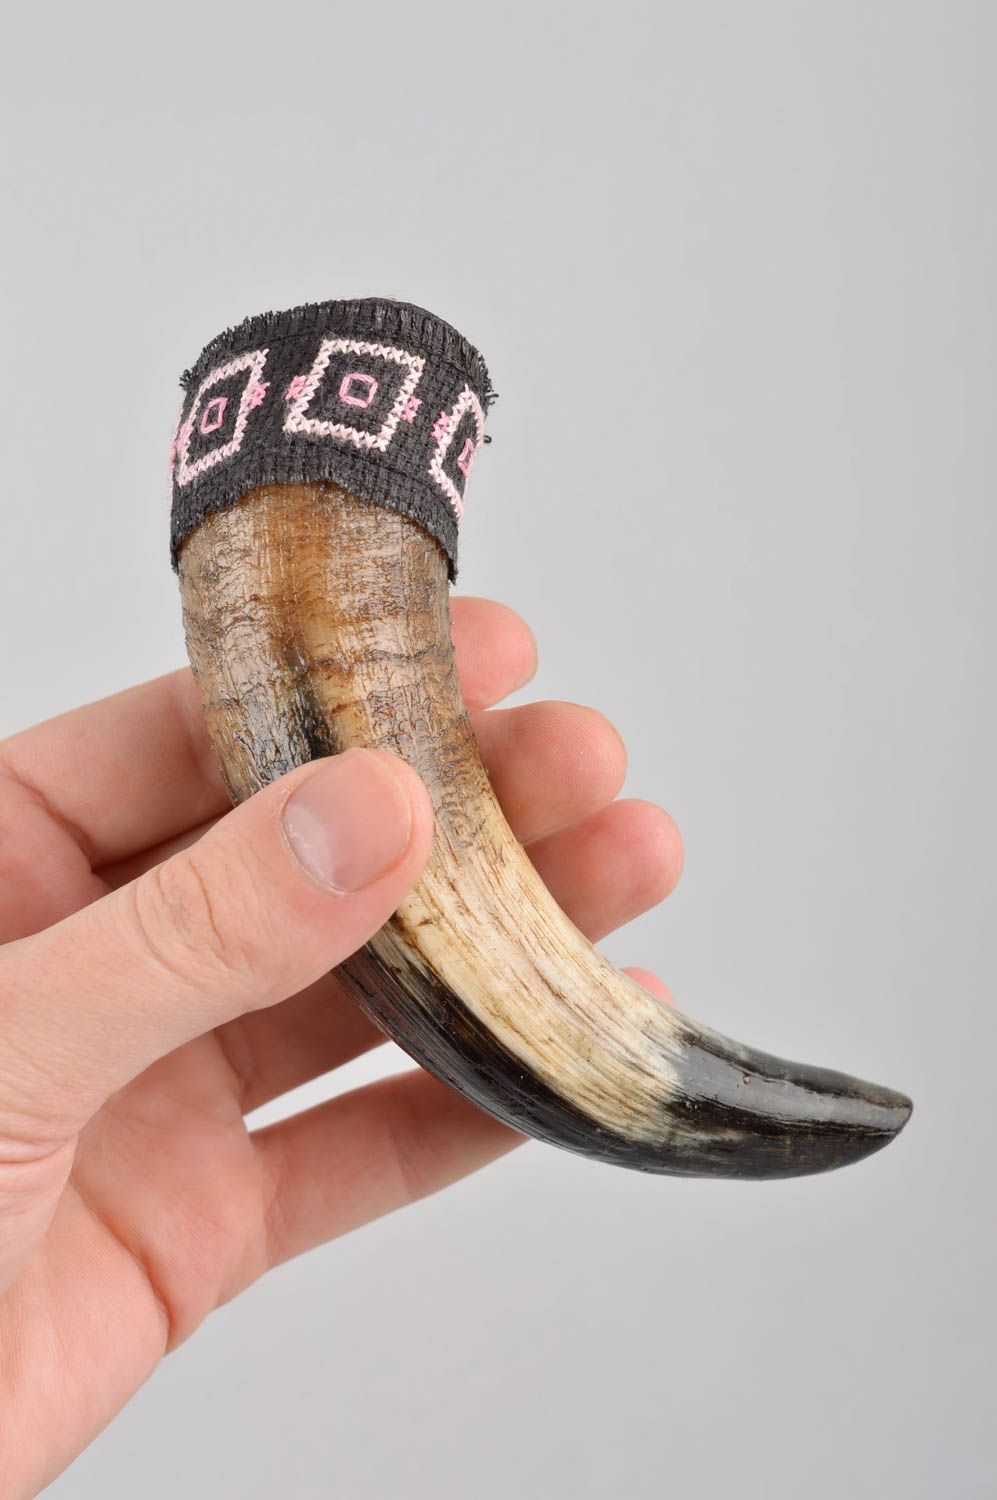 Beautiful handmade drinking horn table decor ideas home goods small gifts photo 5